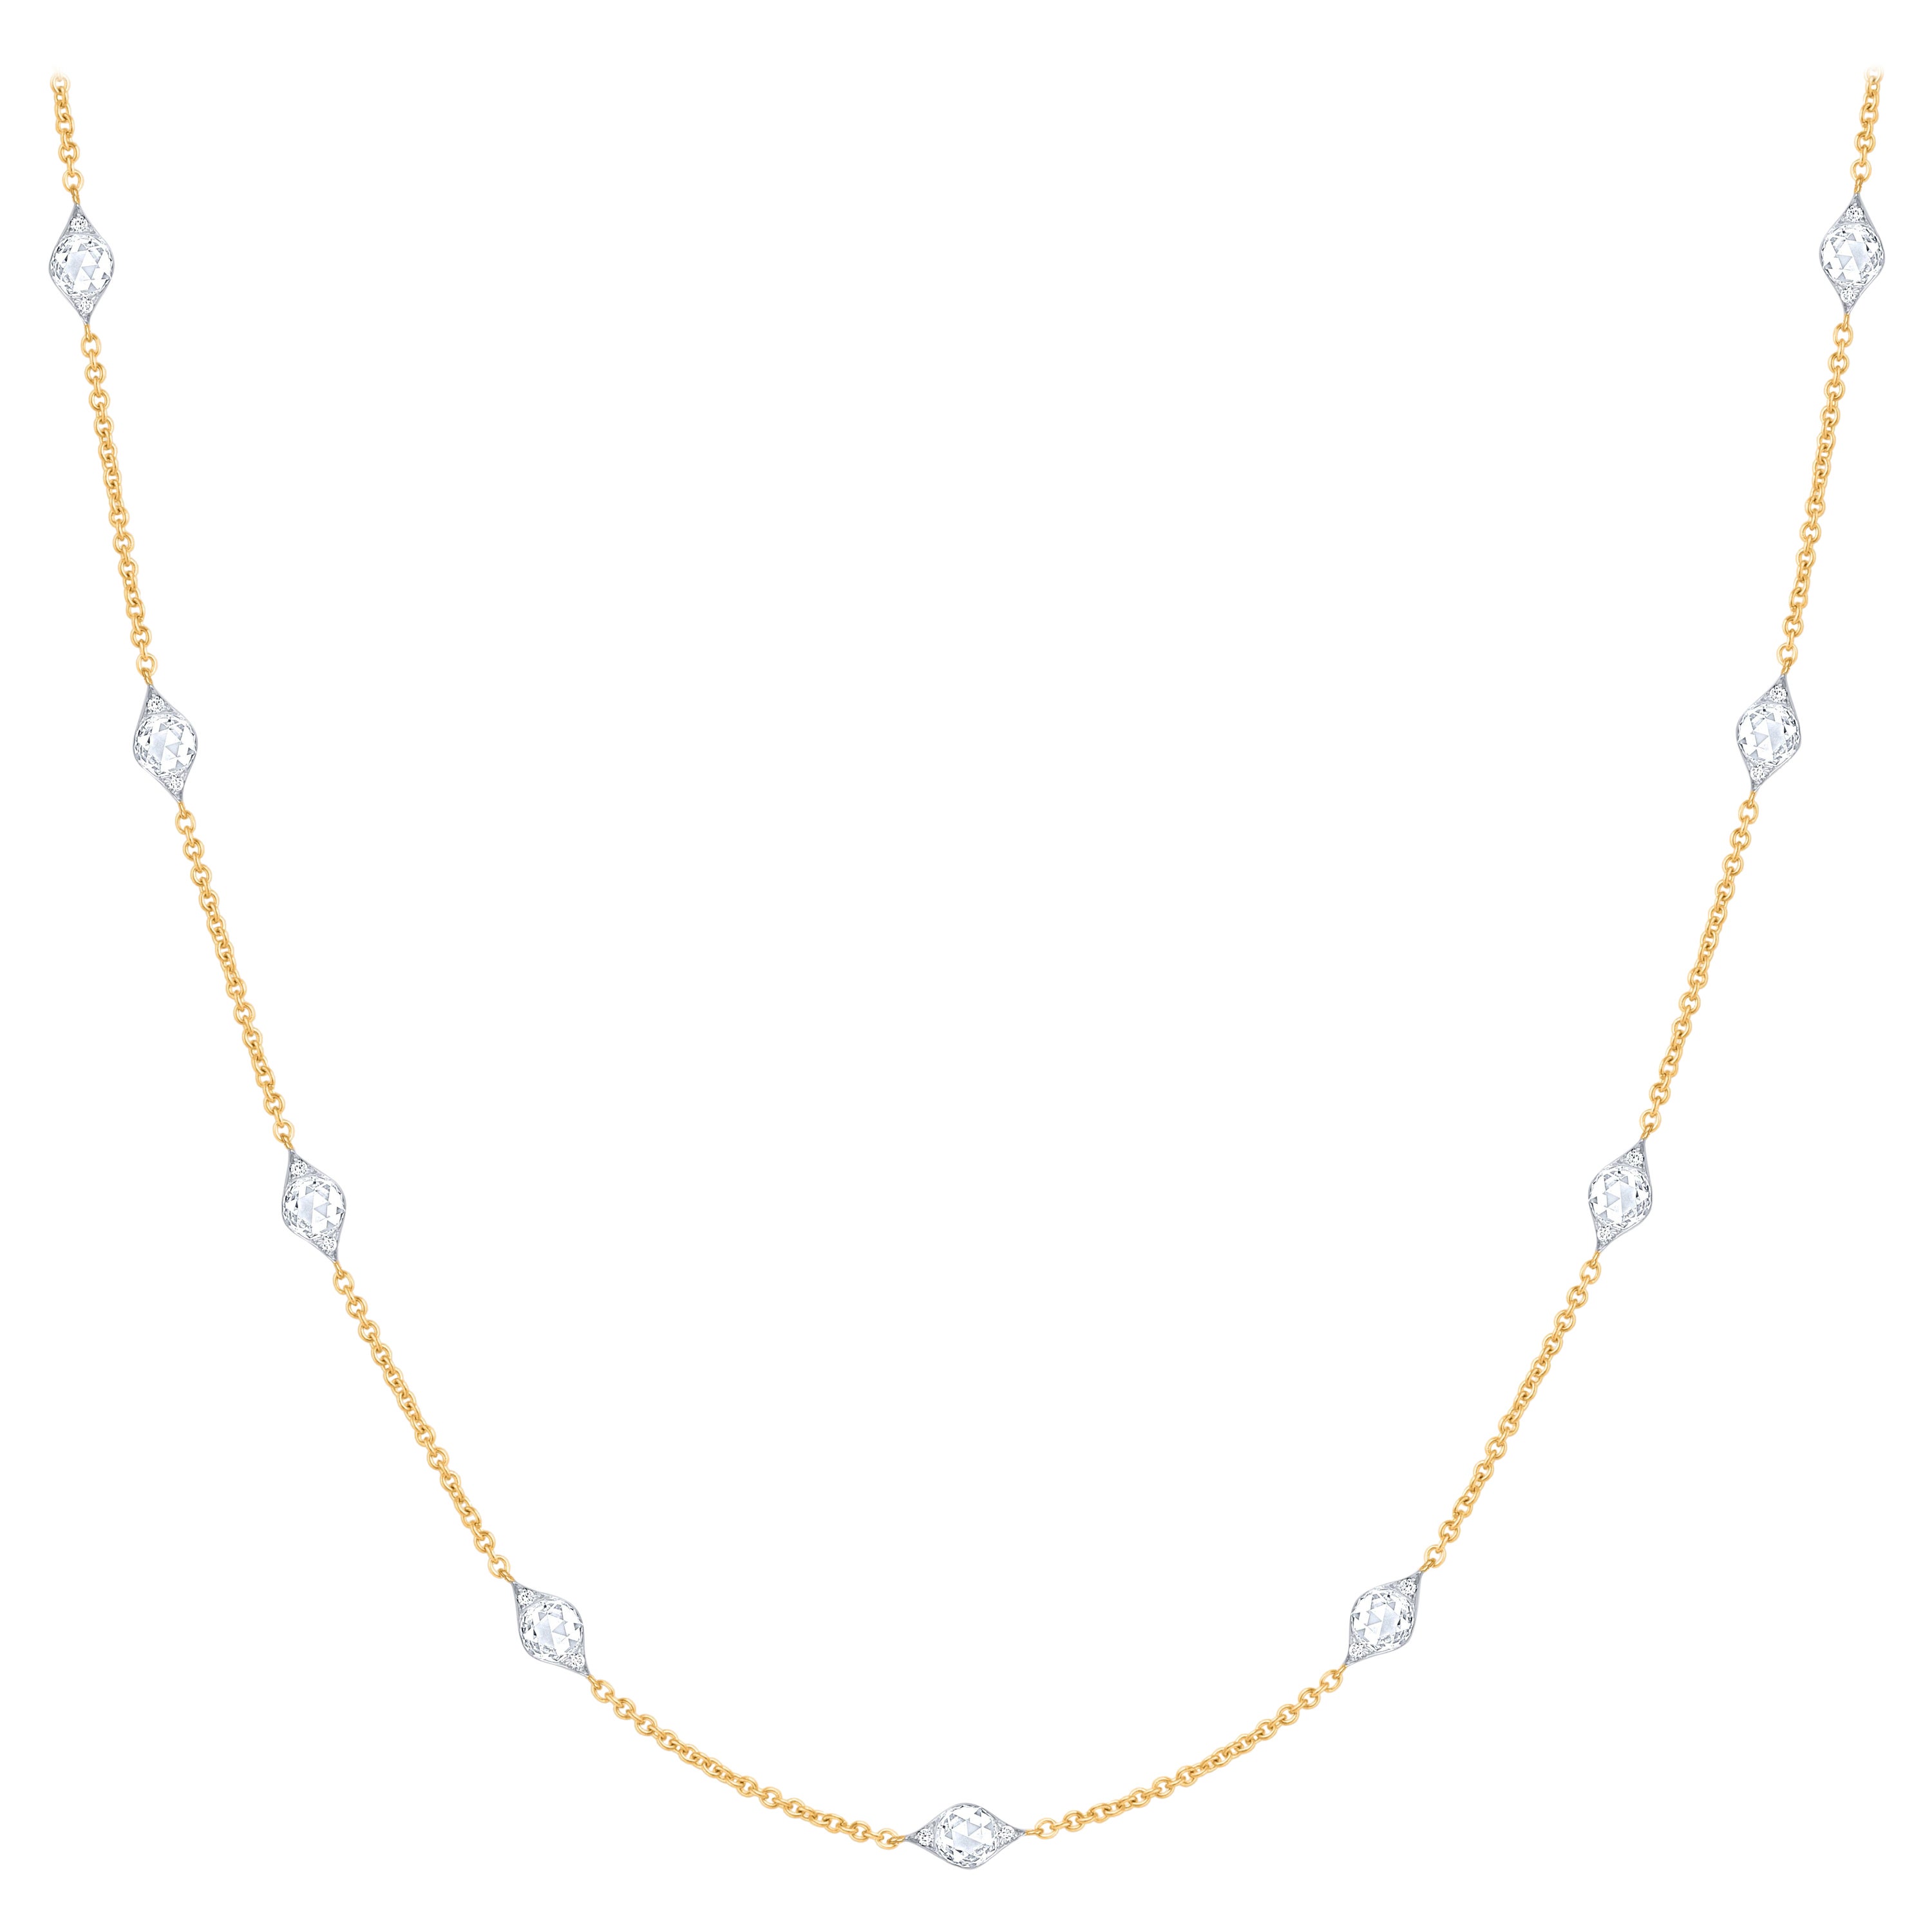 Harakh Colorless Natural Diamond 1.40 Carat Station Necklace in 18 KT Gold